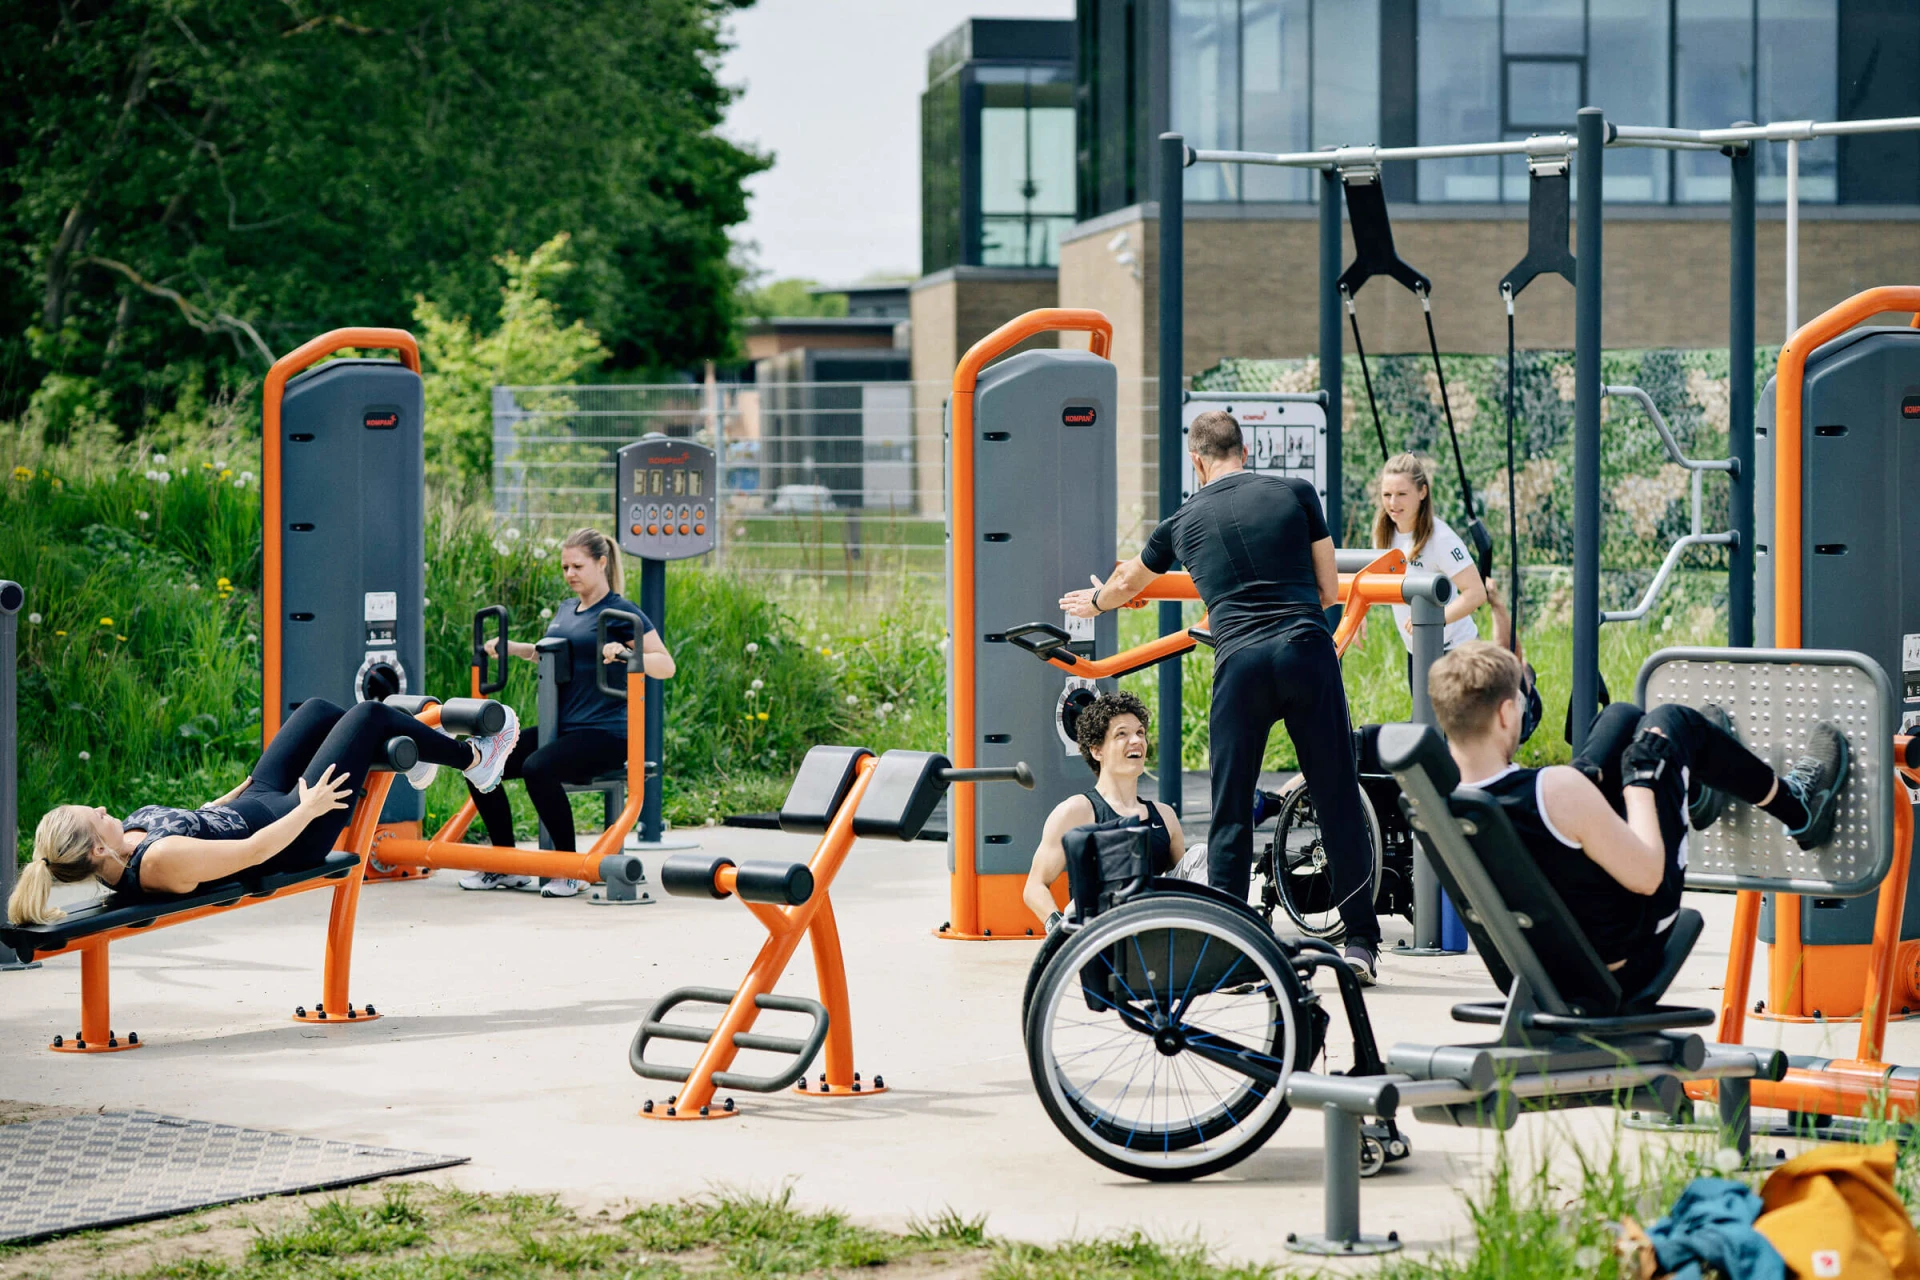 people working out on a outdoor fitness area - hero image